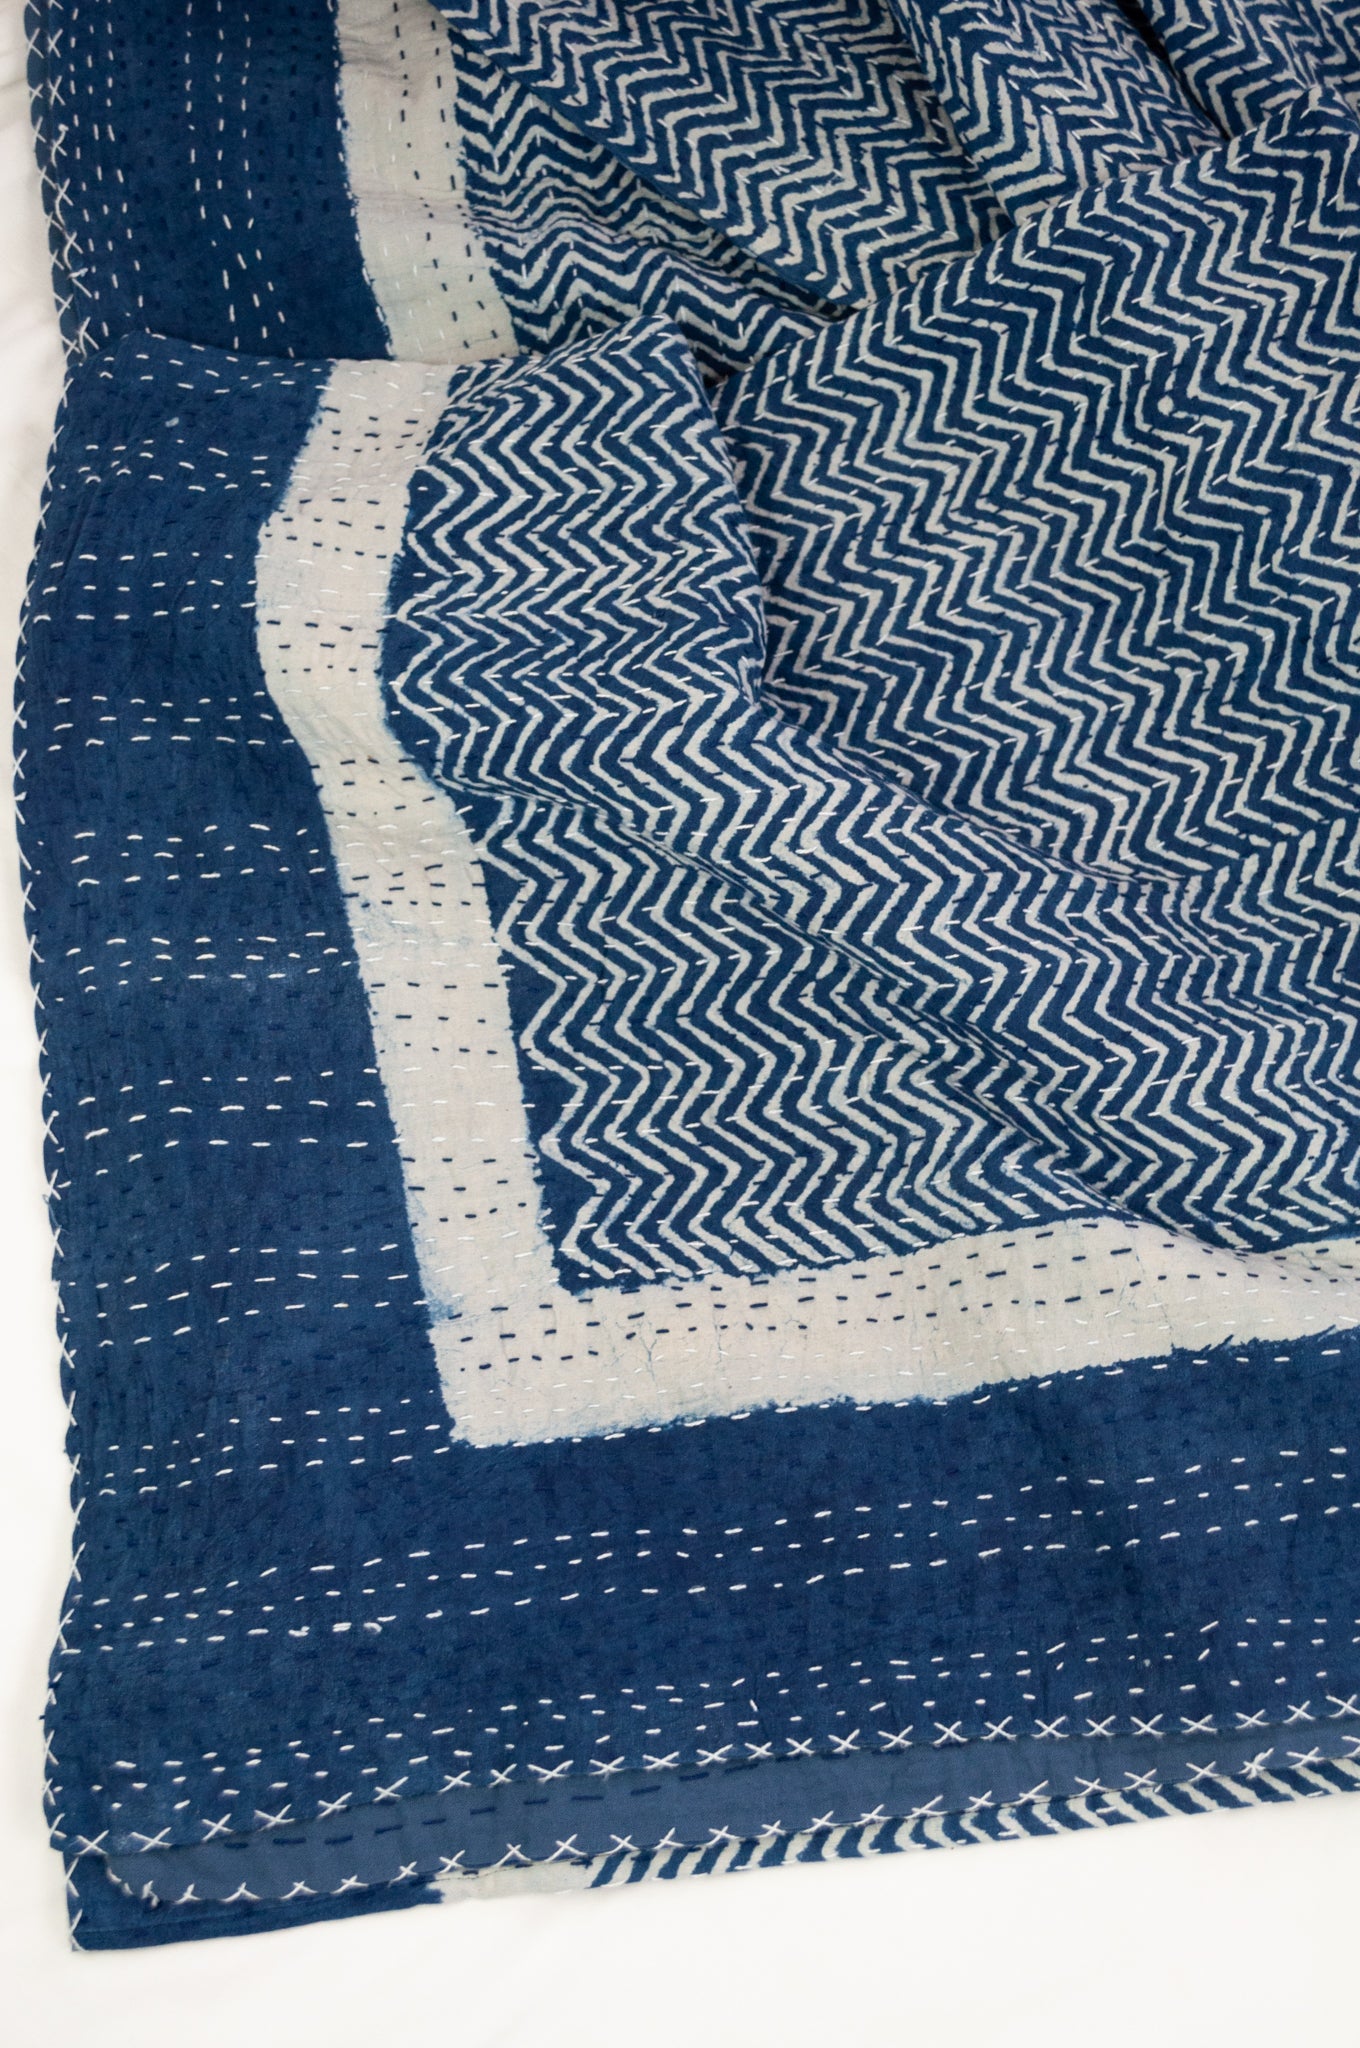 Block printed in indigo, blue and white kantha quilt hand made in Jaipur, featuring chevron pattern and plain blue and white border.